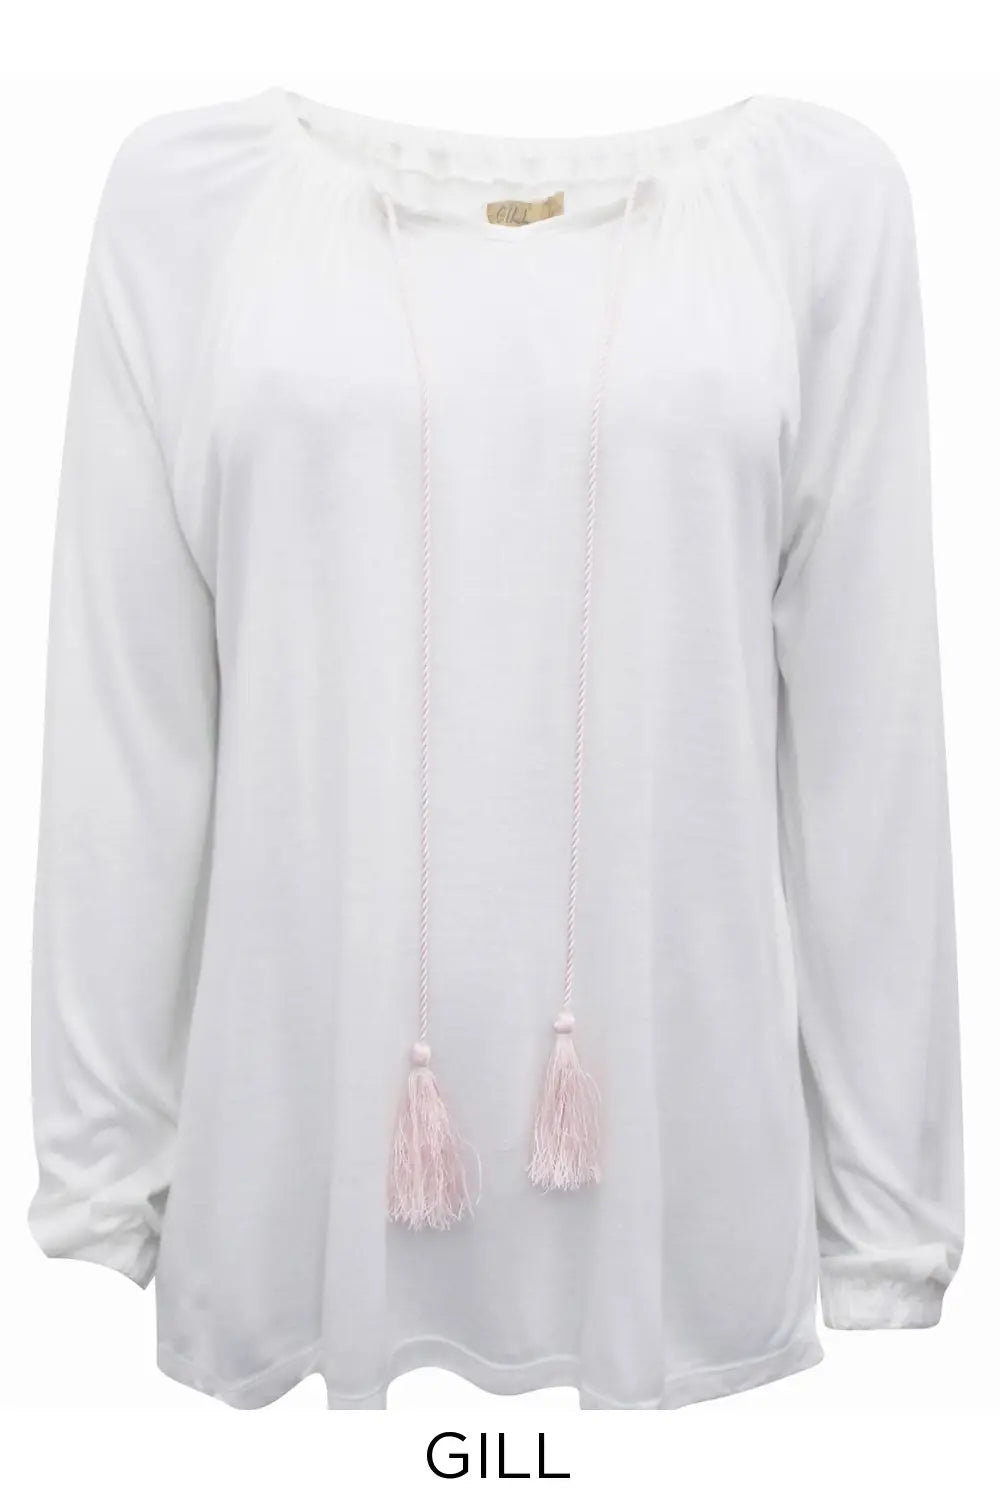 Gill Tasselled Gipsy Tunic Top White / S